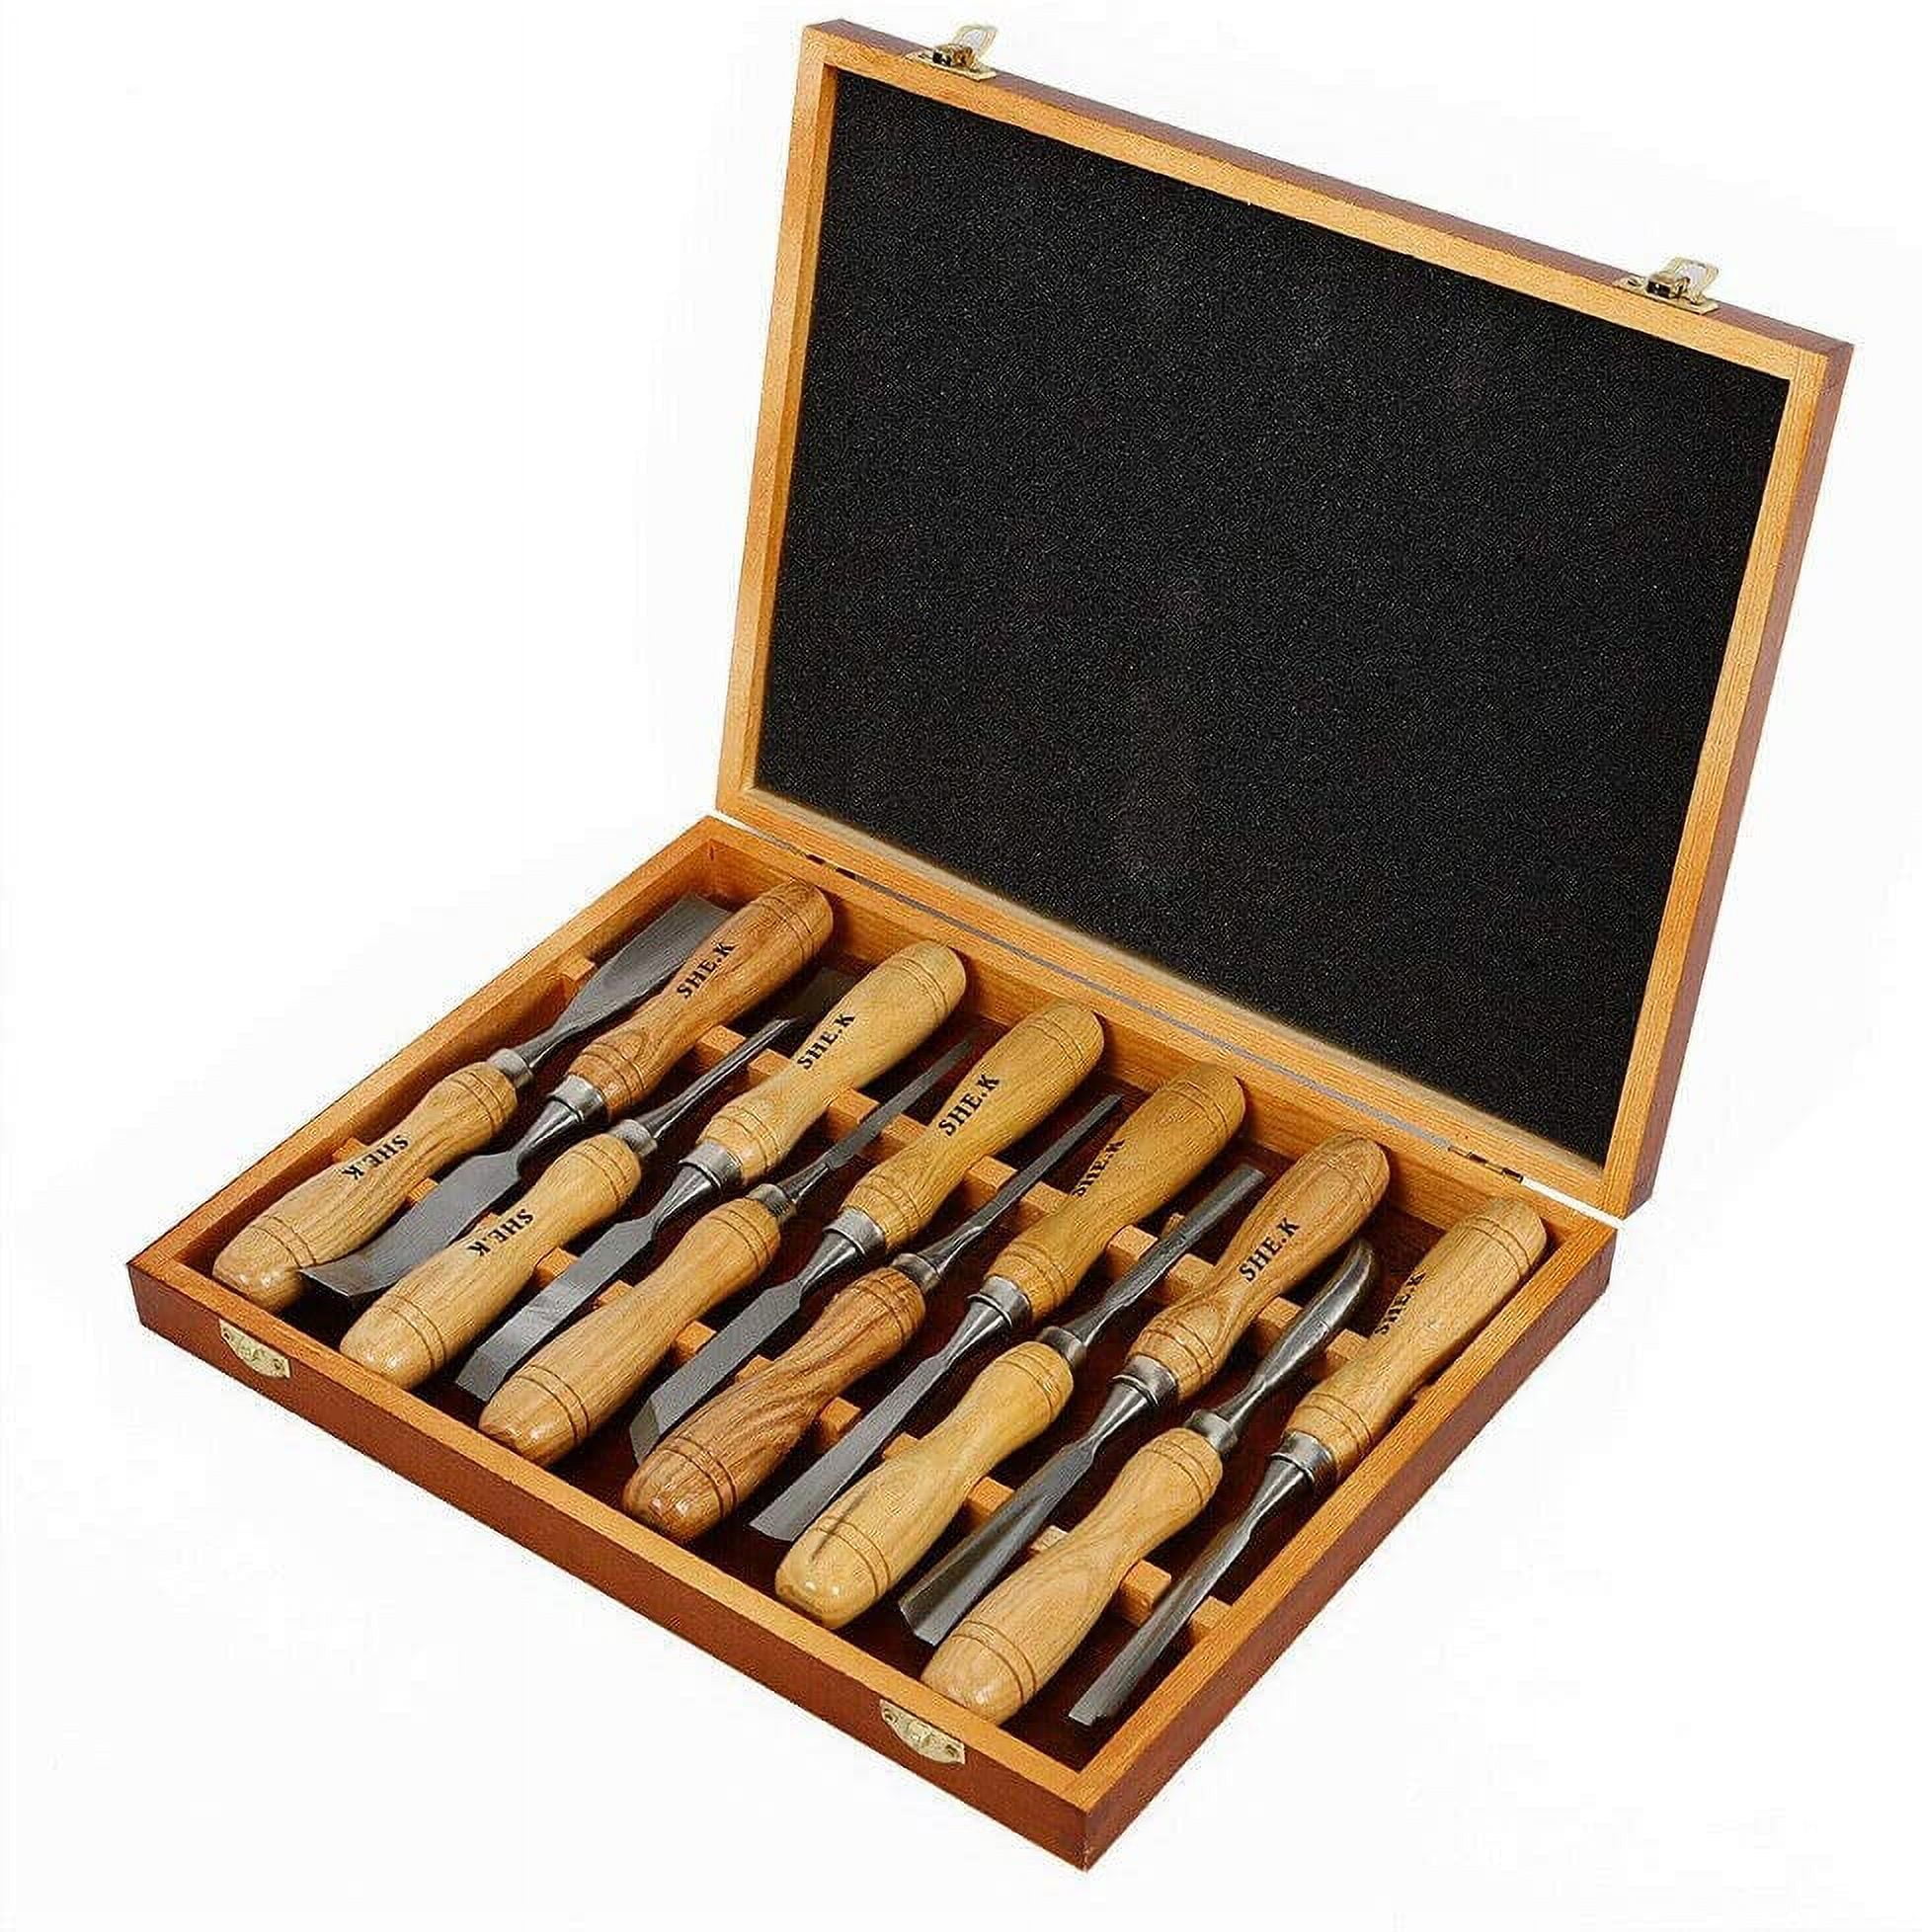 12PCS Wood Carving Hand Chisel Set Woodworking Professional Lathe Gouges  Tools - Price history & Review, AliExpress Seller - Shop3216169 Store